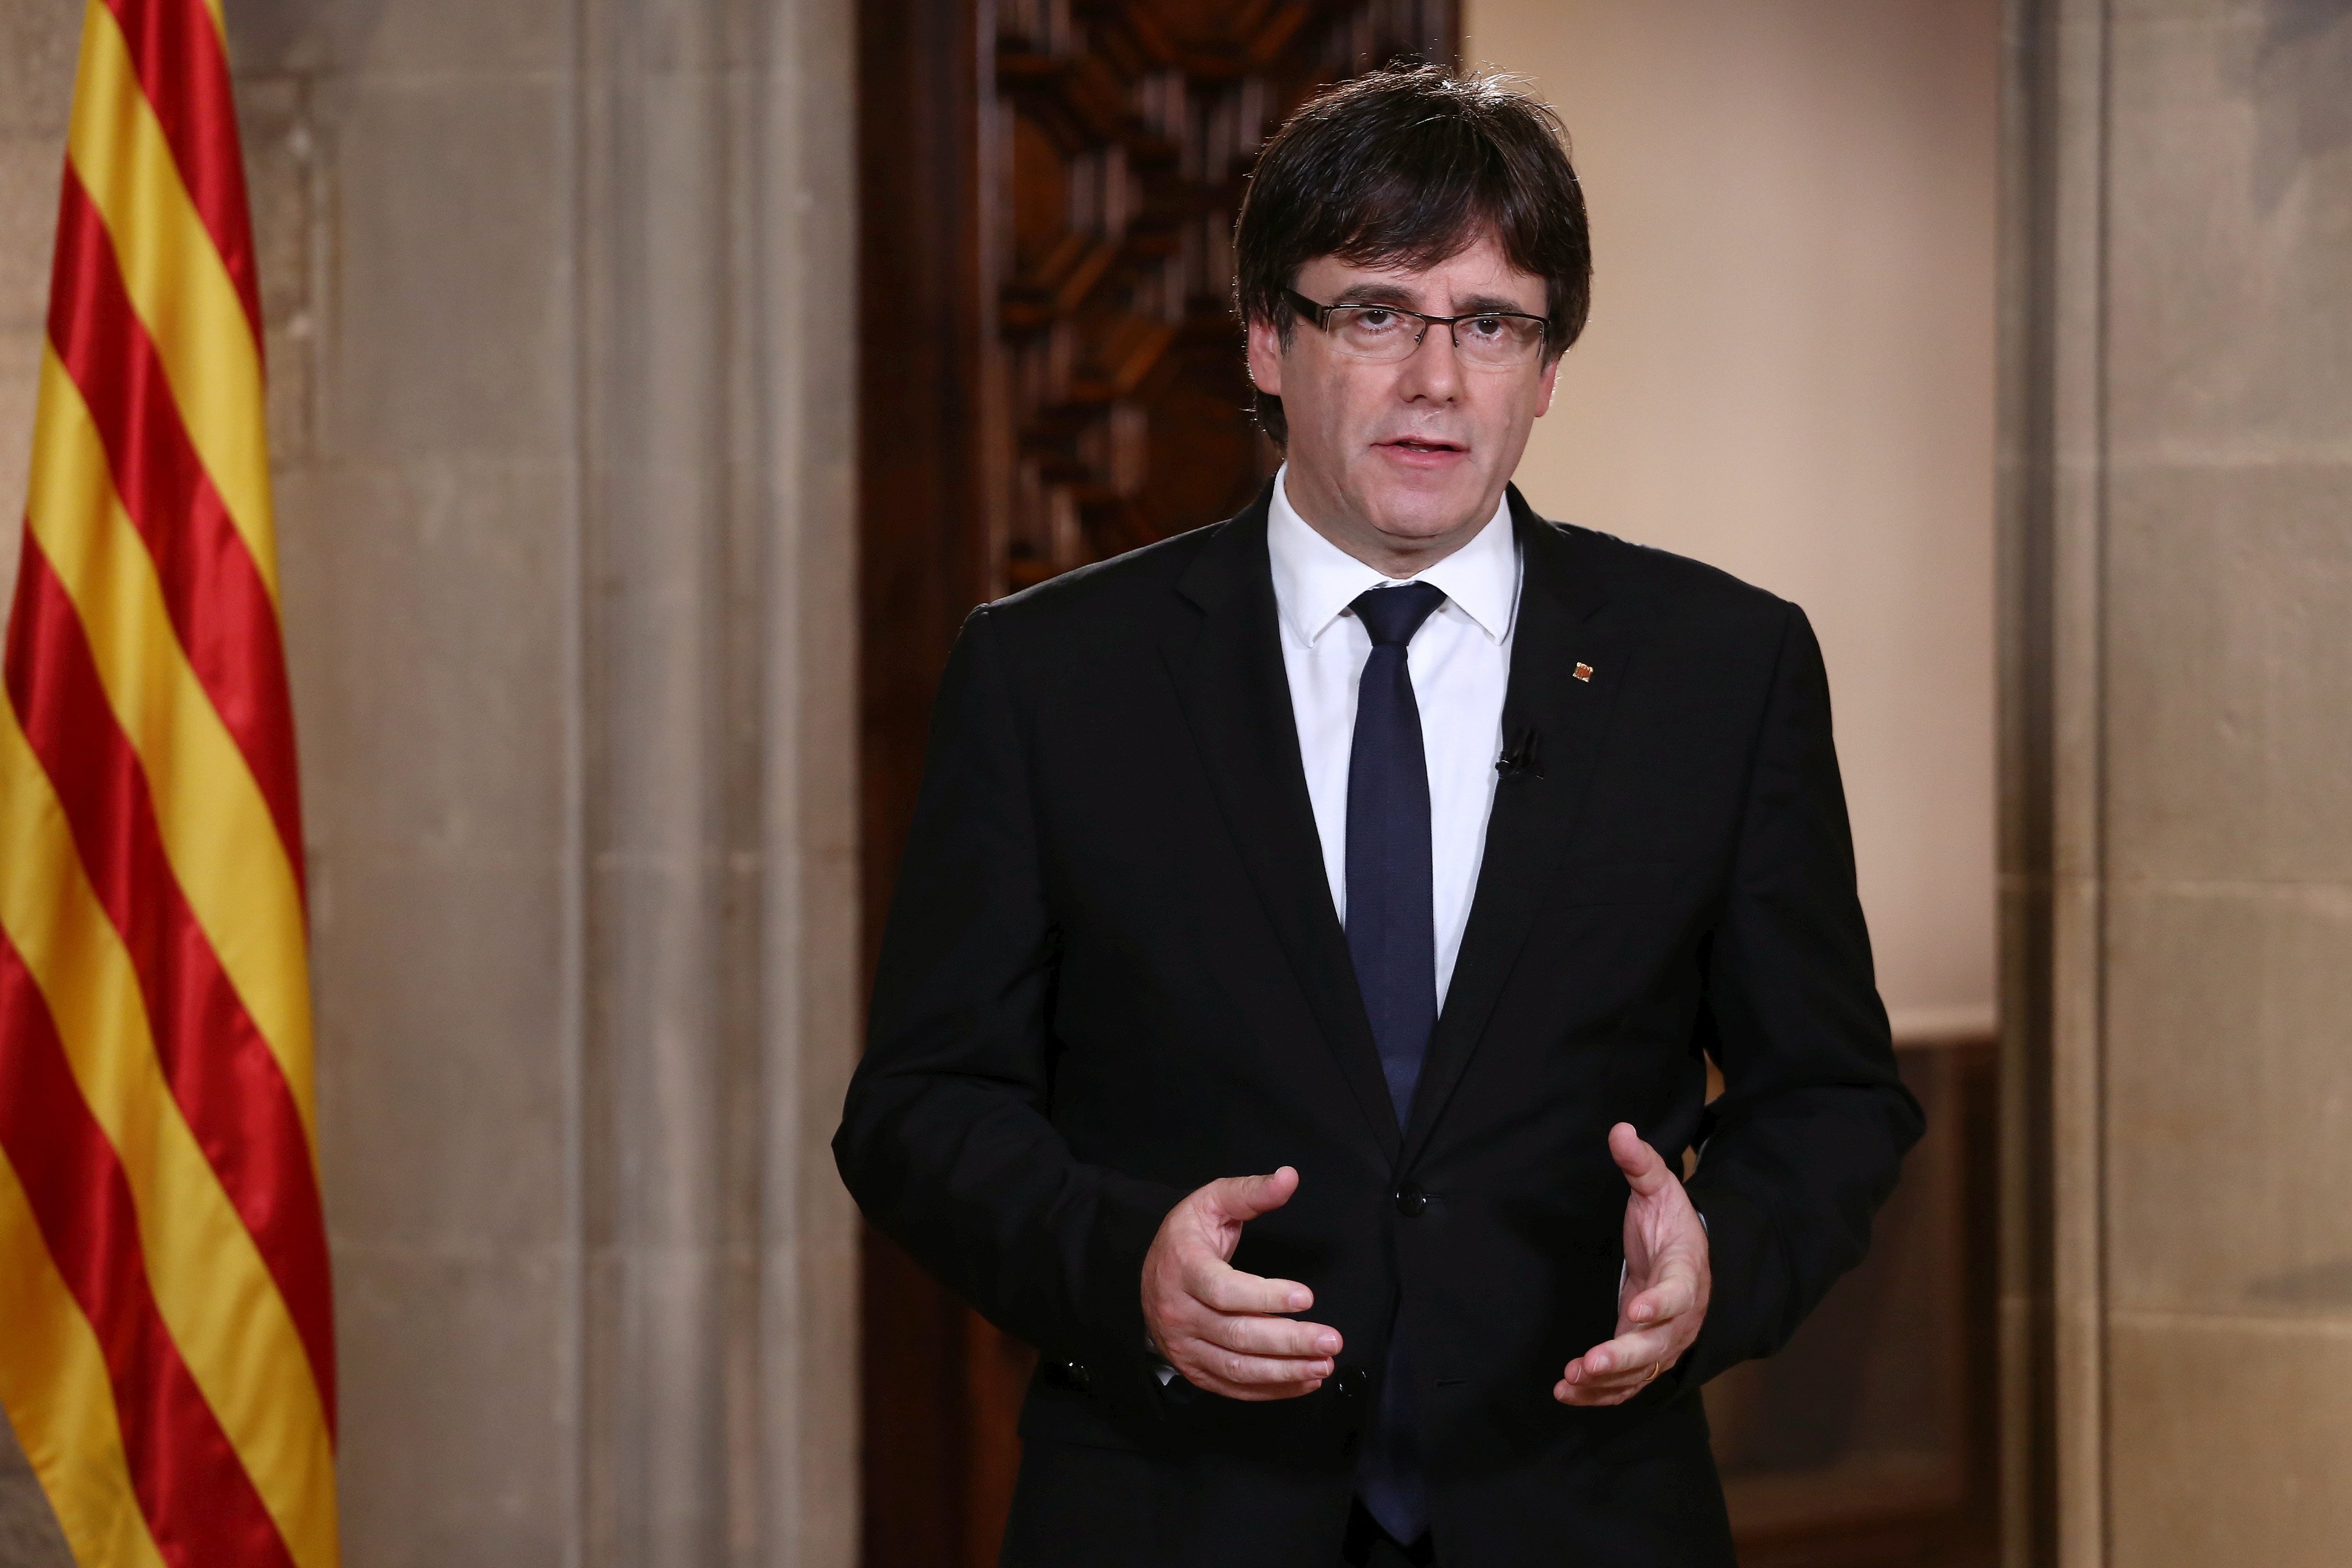 Puigdemont rejects Spanish king's speech: "Not like that"